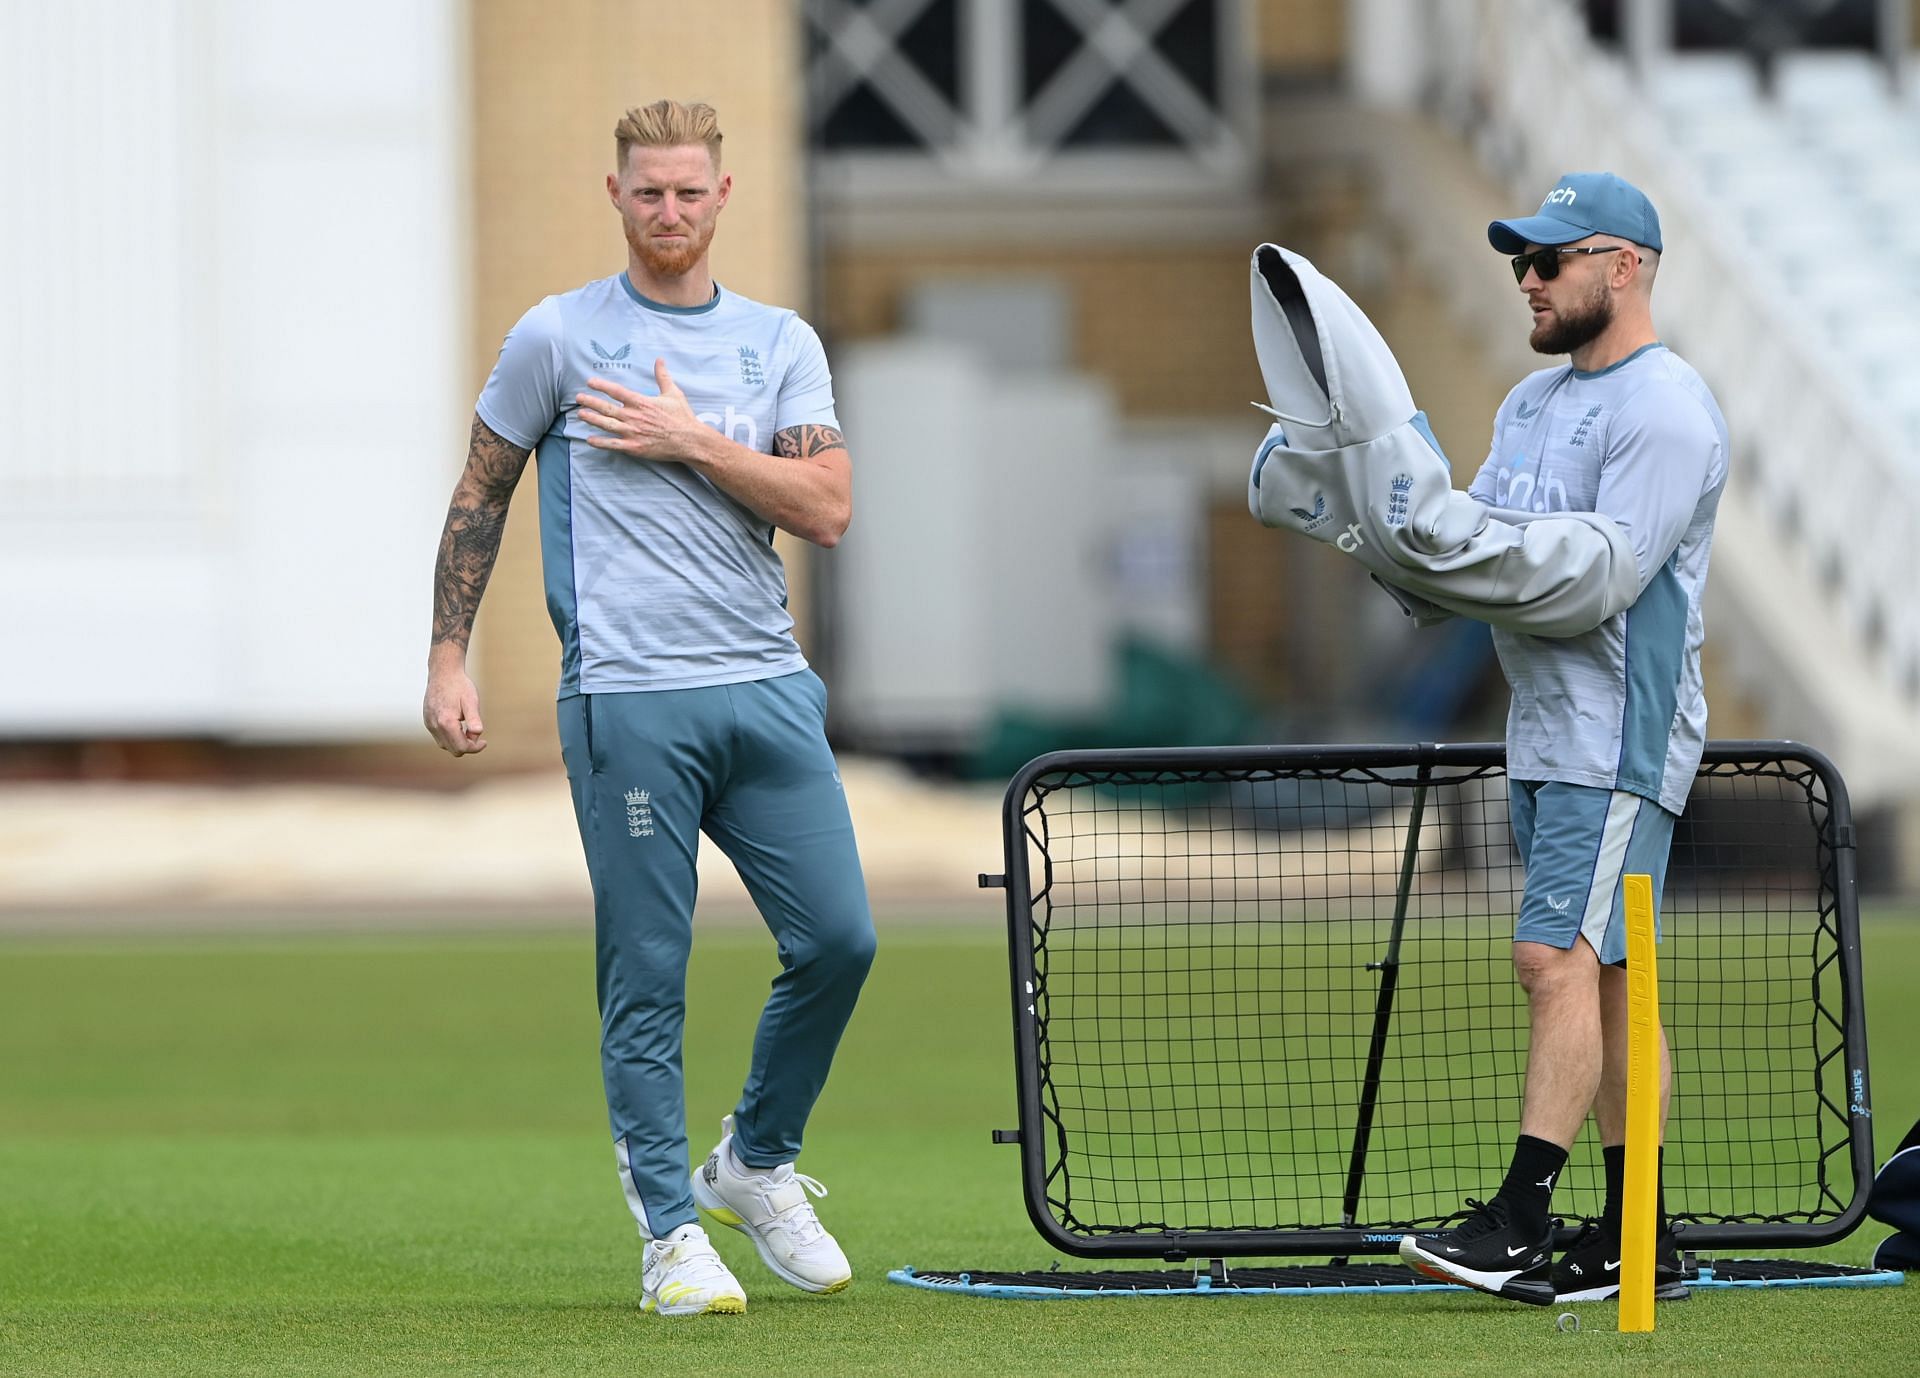 Ben Stokes and Brendon McCullum want England to play an entertaining brand of cricket